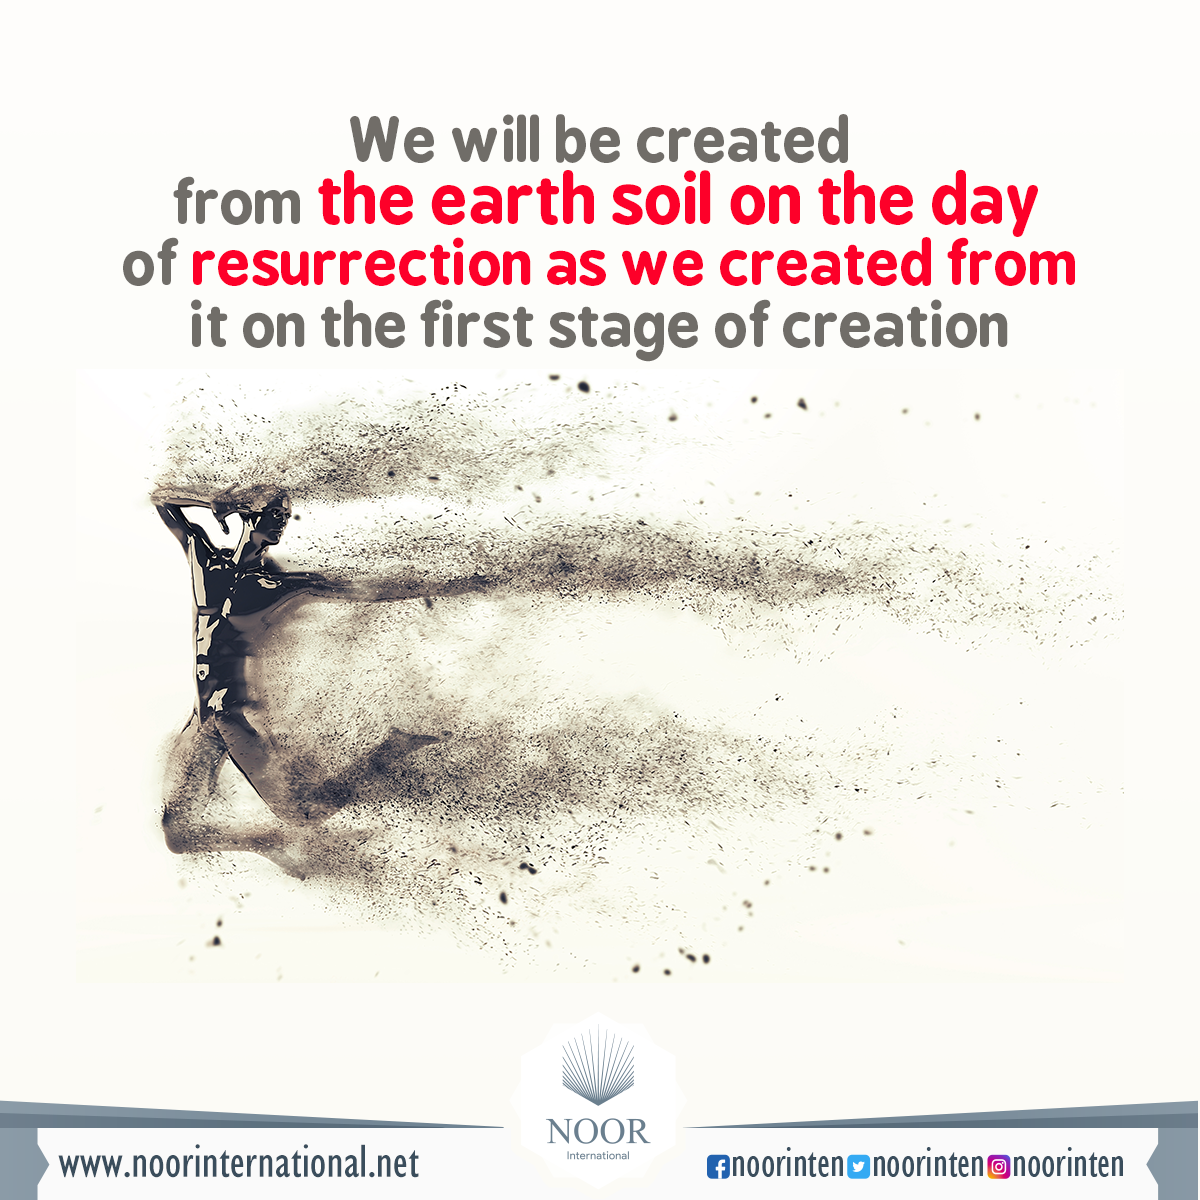 We will be created from the earth soil on the day of resurrection as we created from it on the first stage of creation